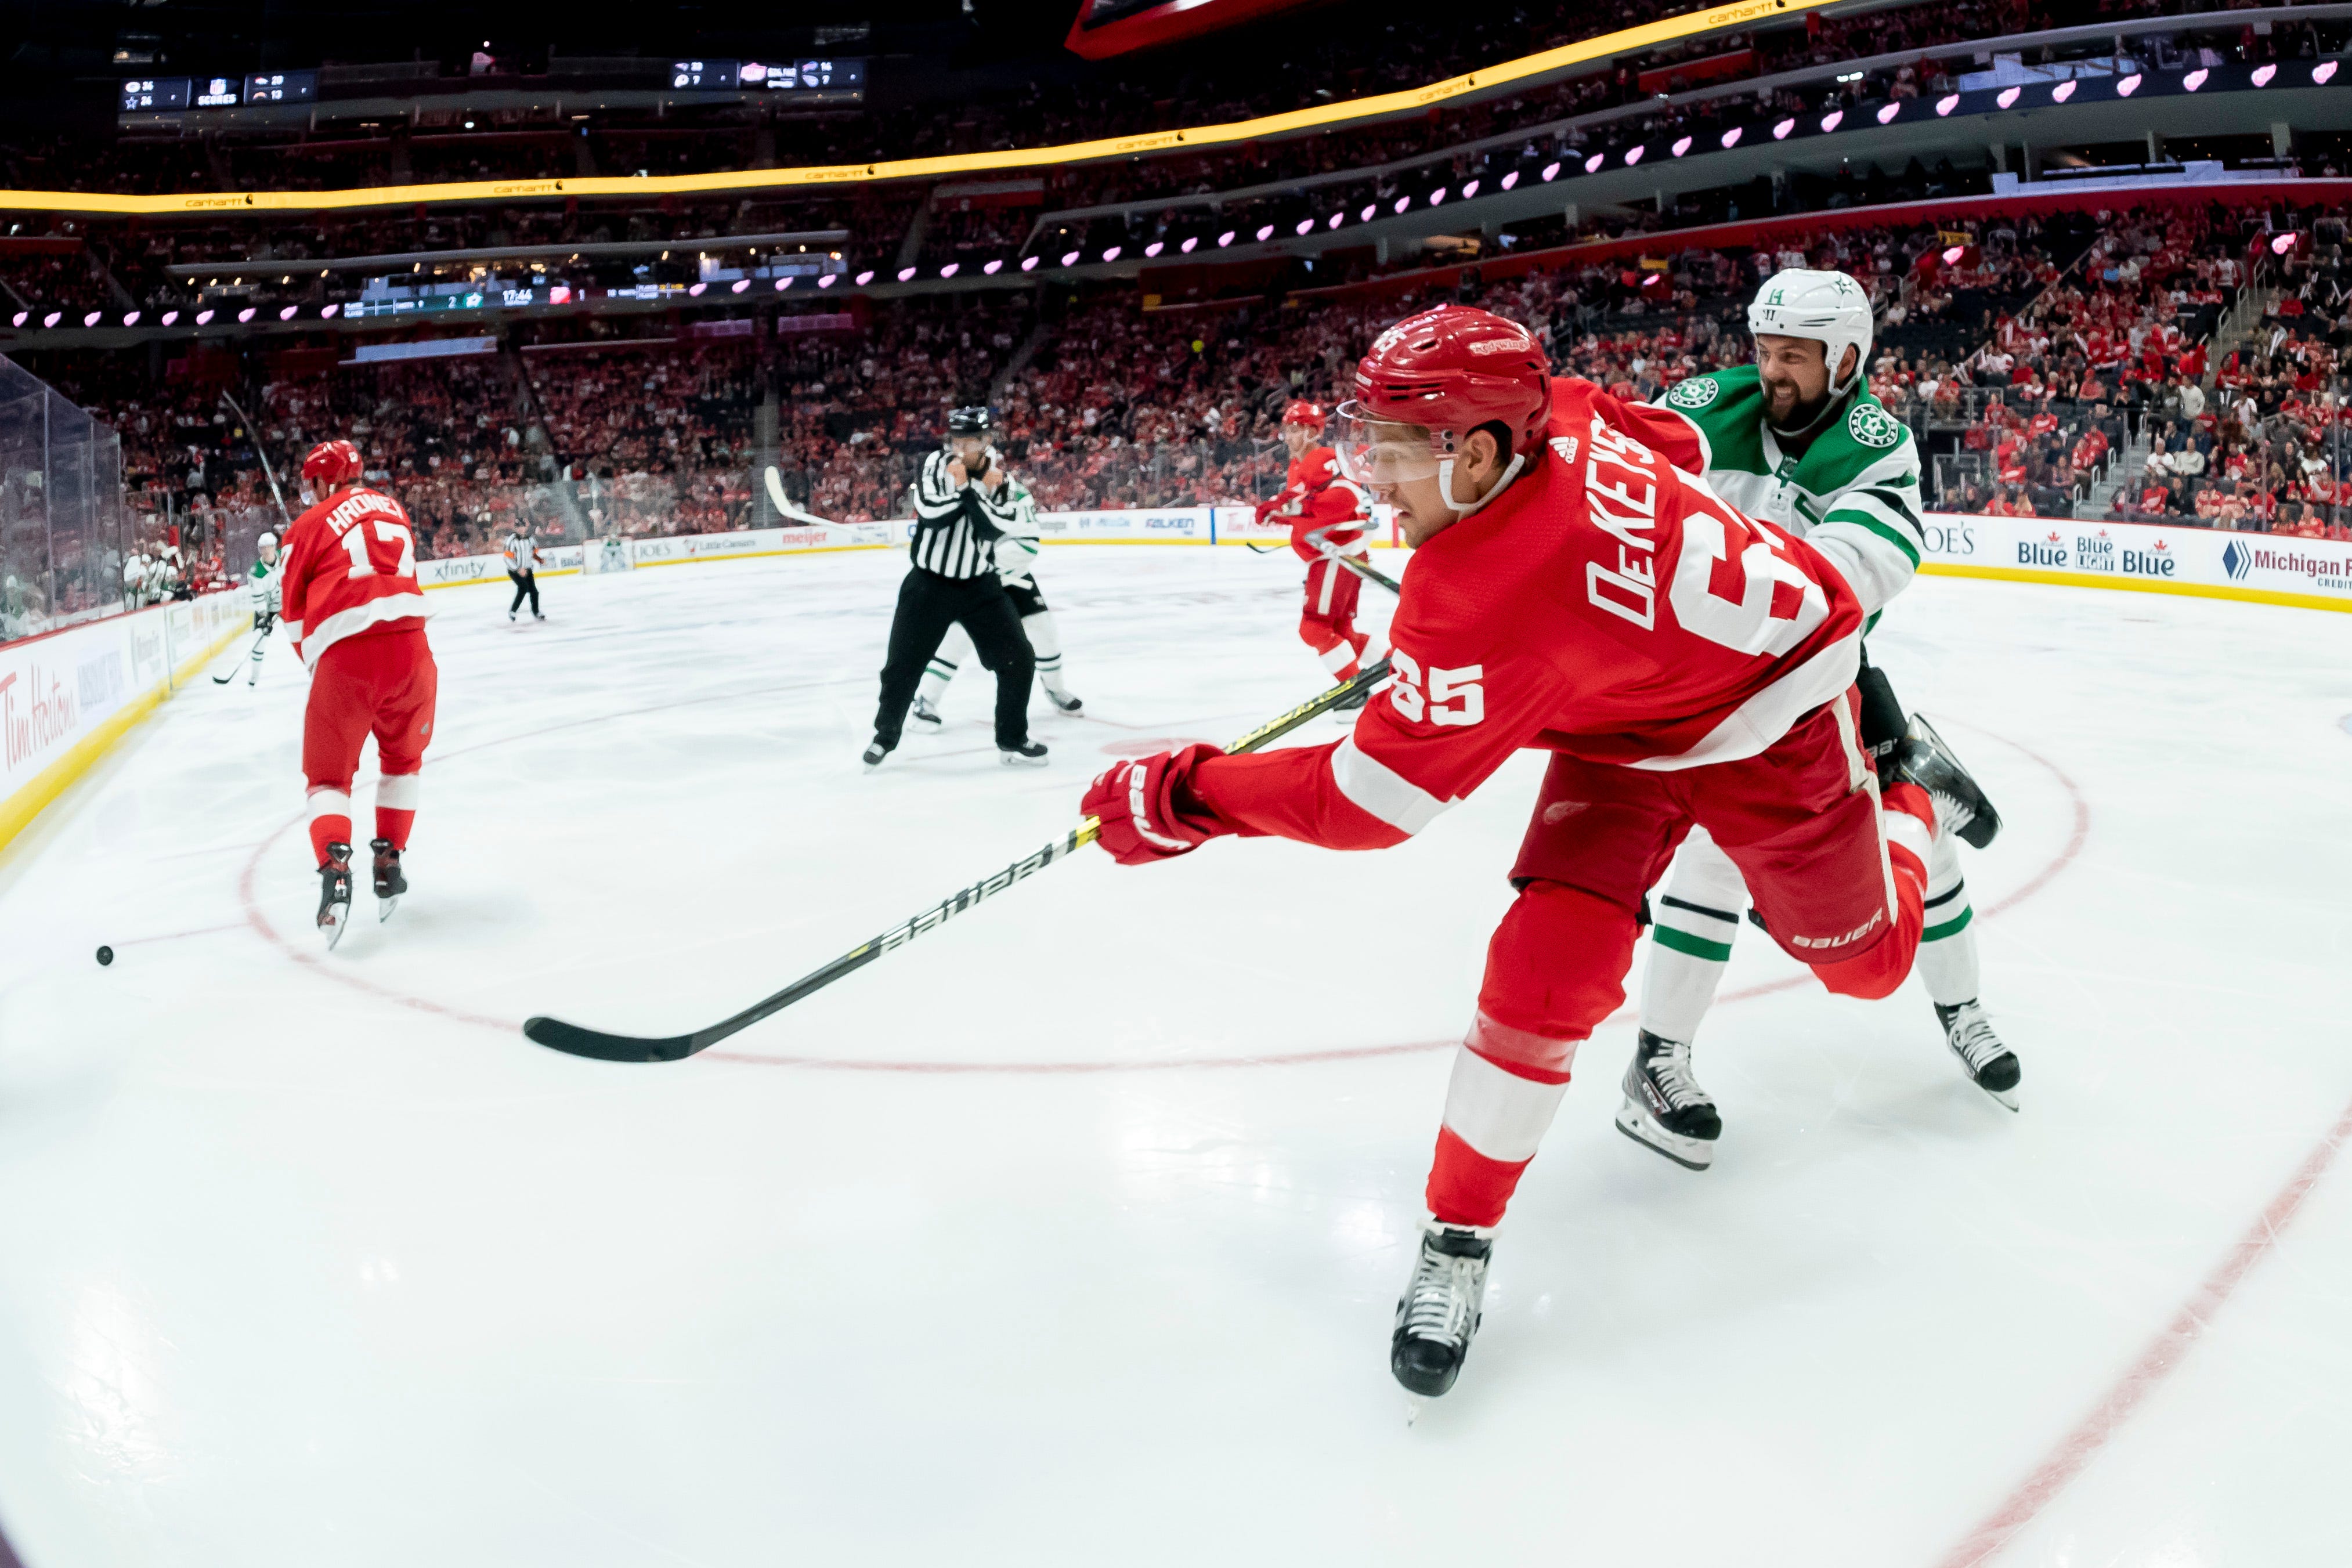 Danny DeKeyser – AGE: 30. CONTRACT: Ends 2022, $5 million per. STATS: 8 games, 0 goals, 4 assists. COMMENT: It was a frustrating season for DeKeyser, who had surgery for a herniated disc. The Wings didn’t have the depth to absorb an injury loss like this one. GRADE: Incomplete.